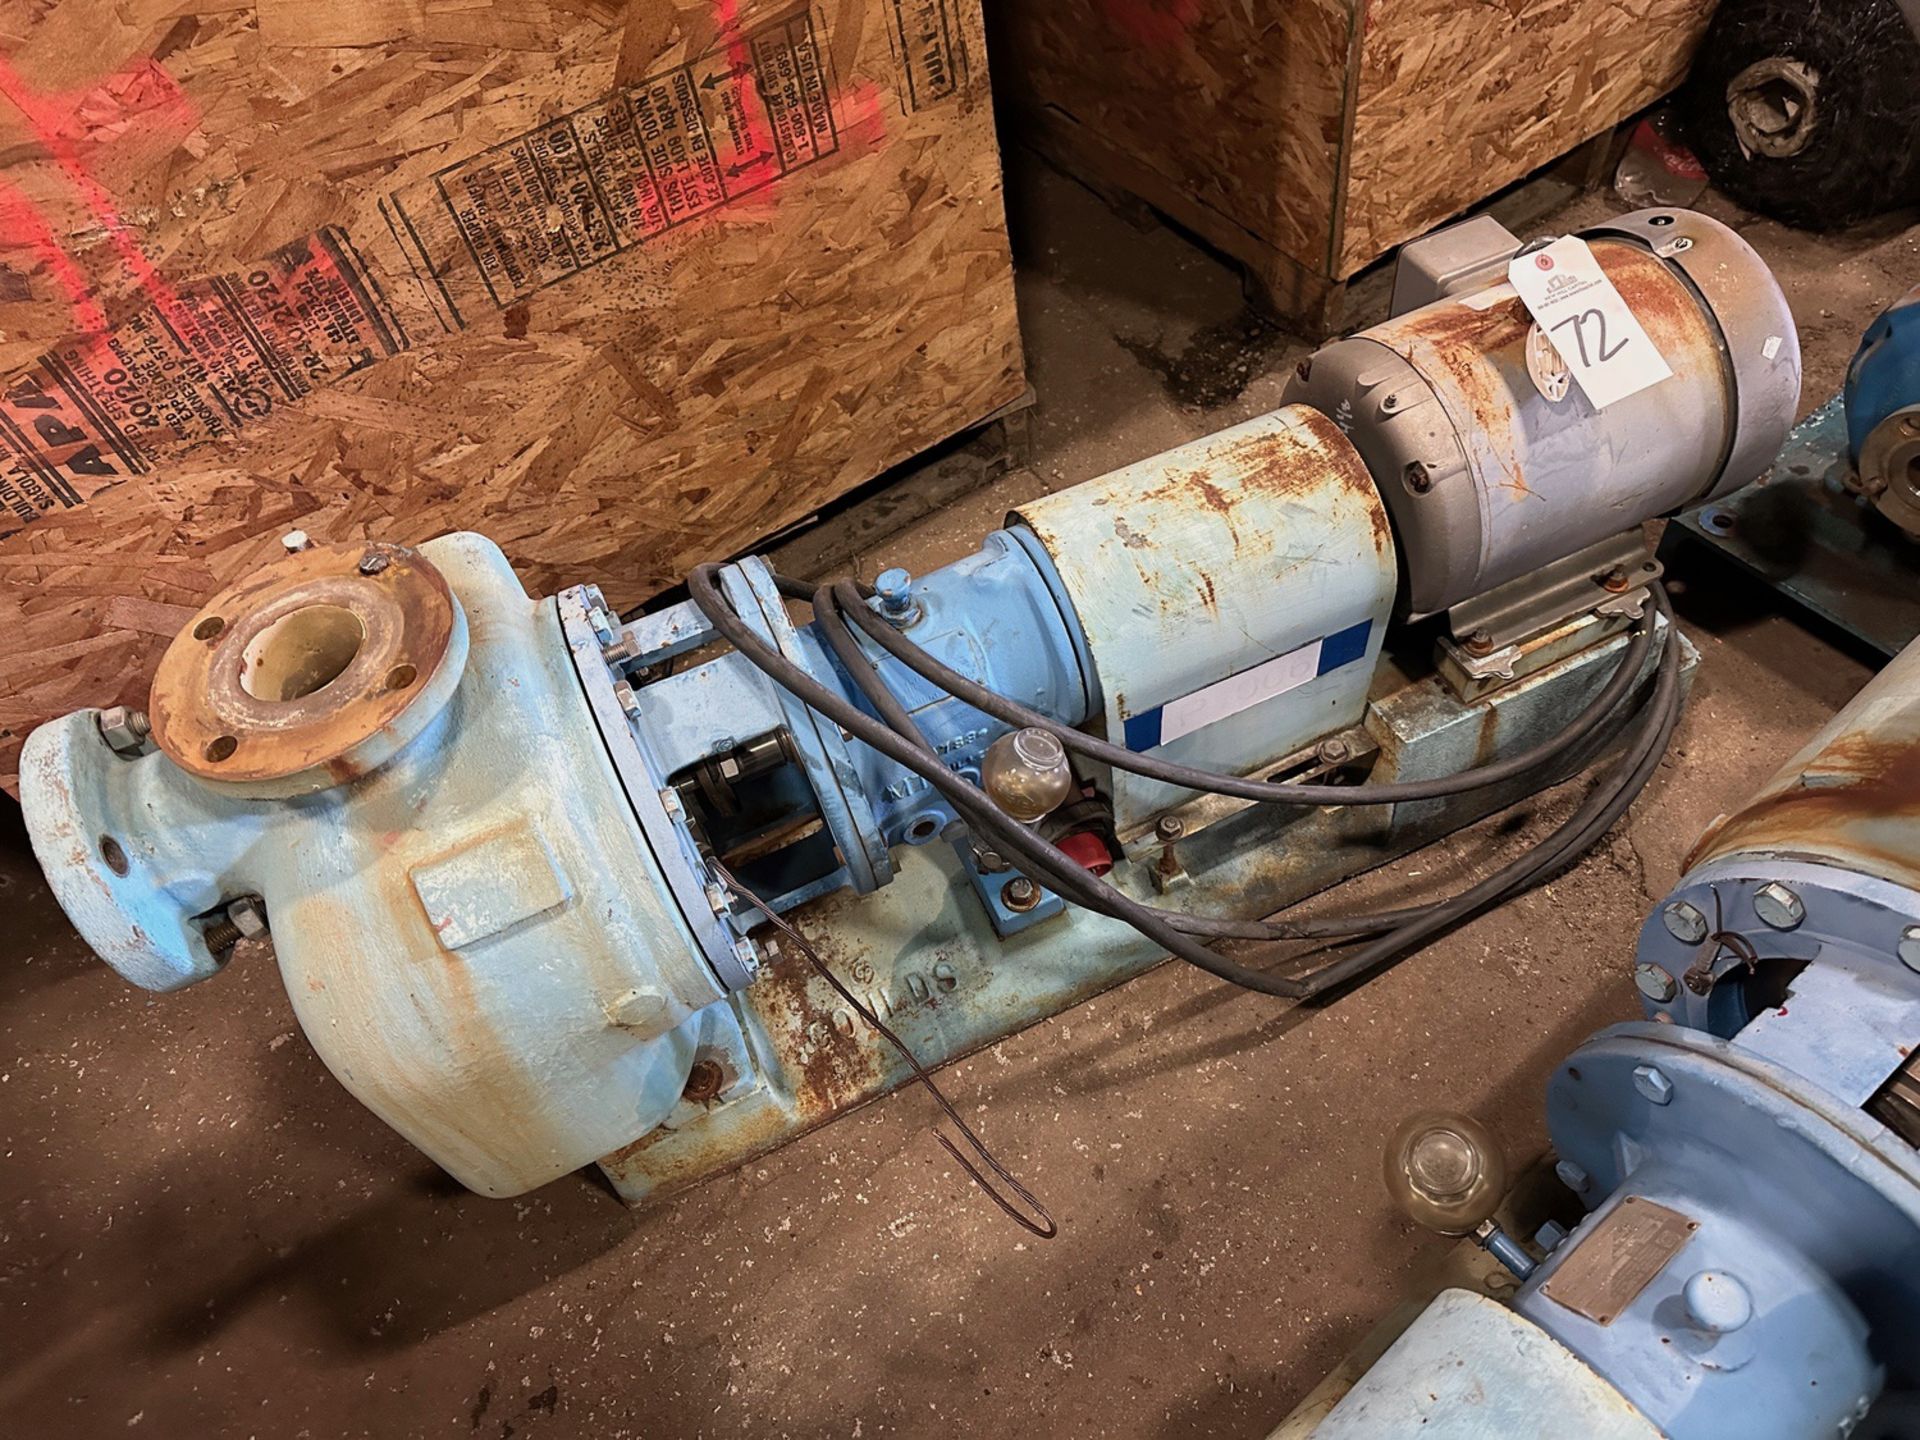 Baldor Reliance 7.5 HP Industrial Motor with Goulds Centrifugal Pump | Rig Fee $25